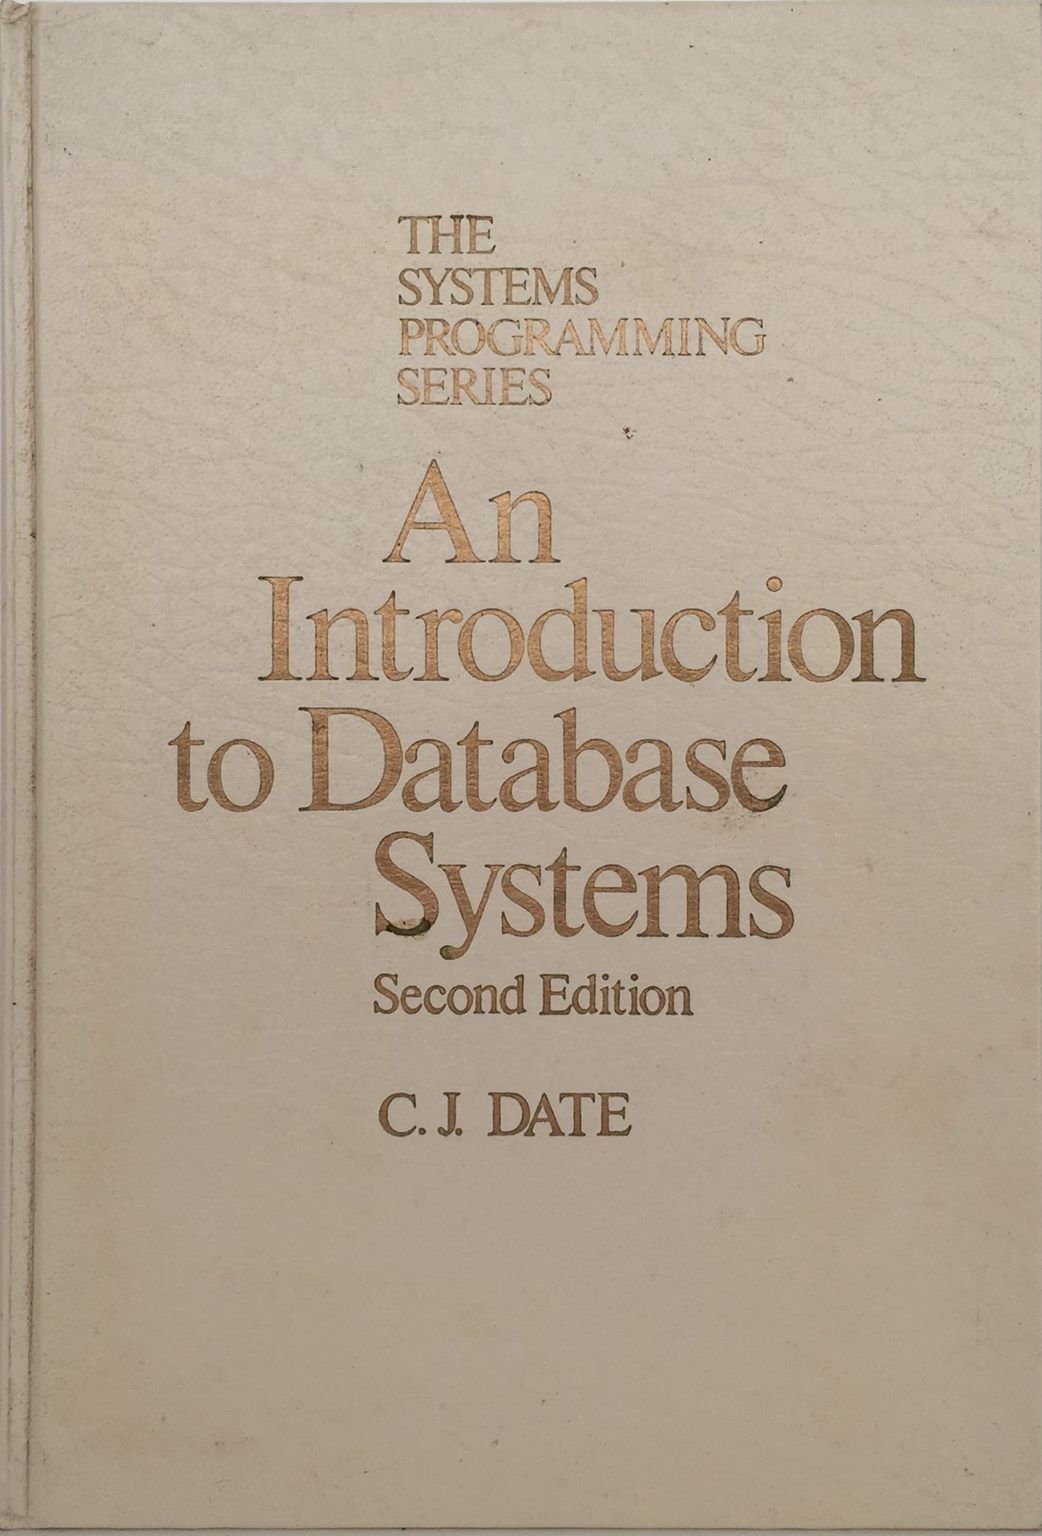 AN INTRODUCTION TO DATABASE SYSTEMS